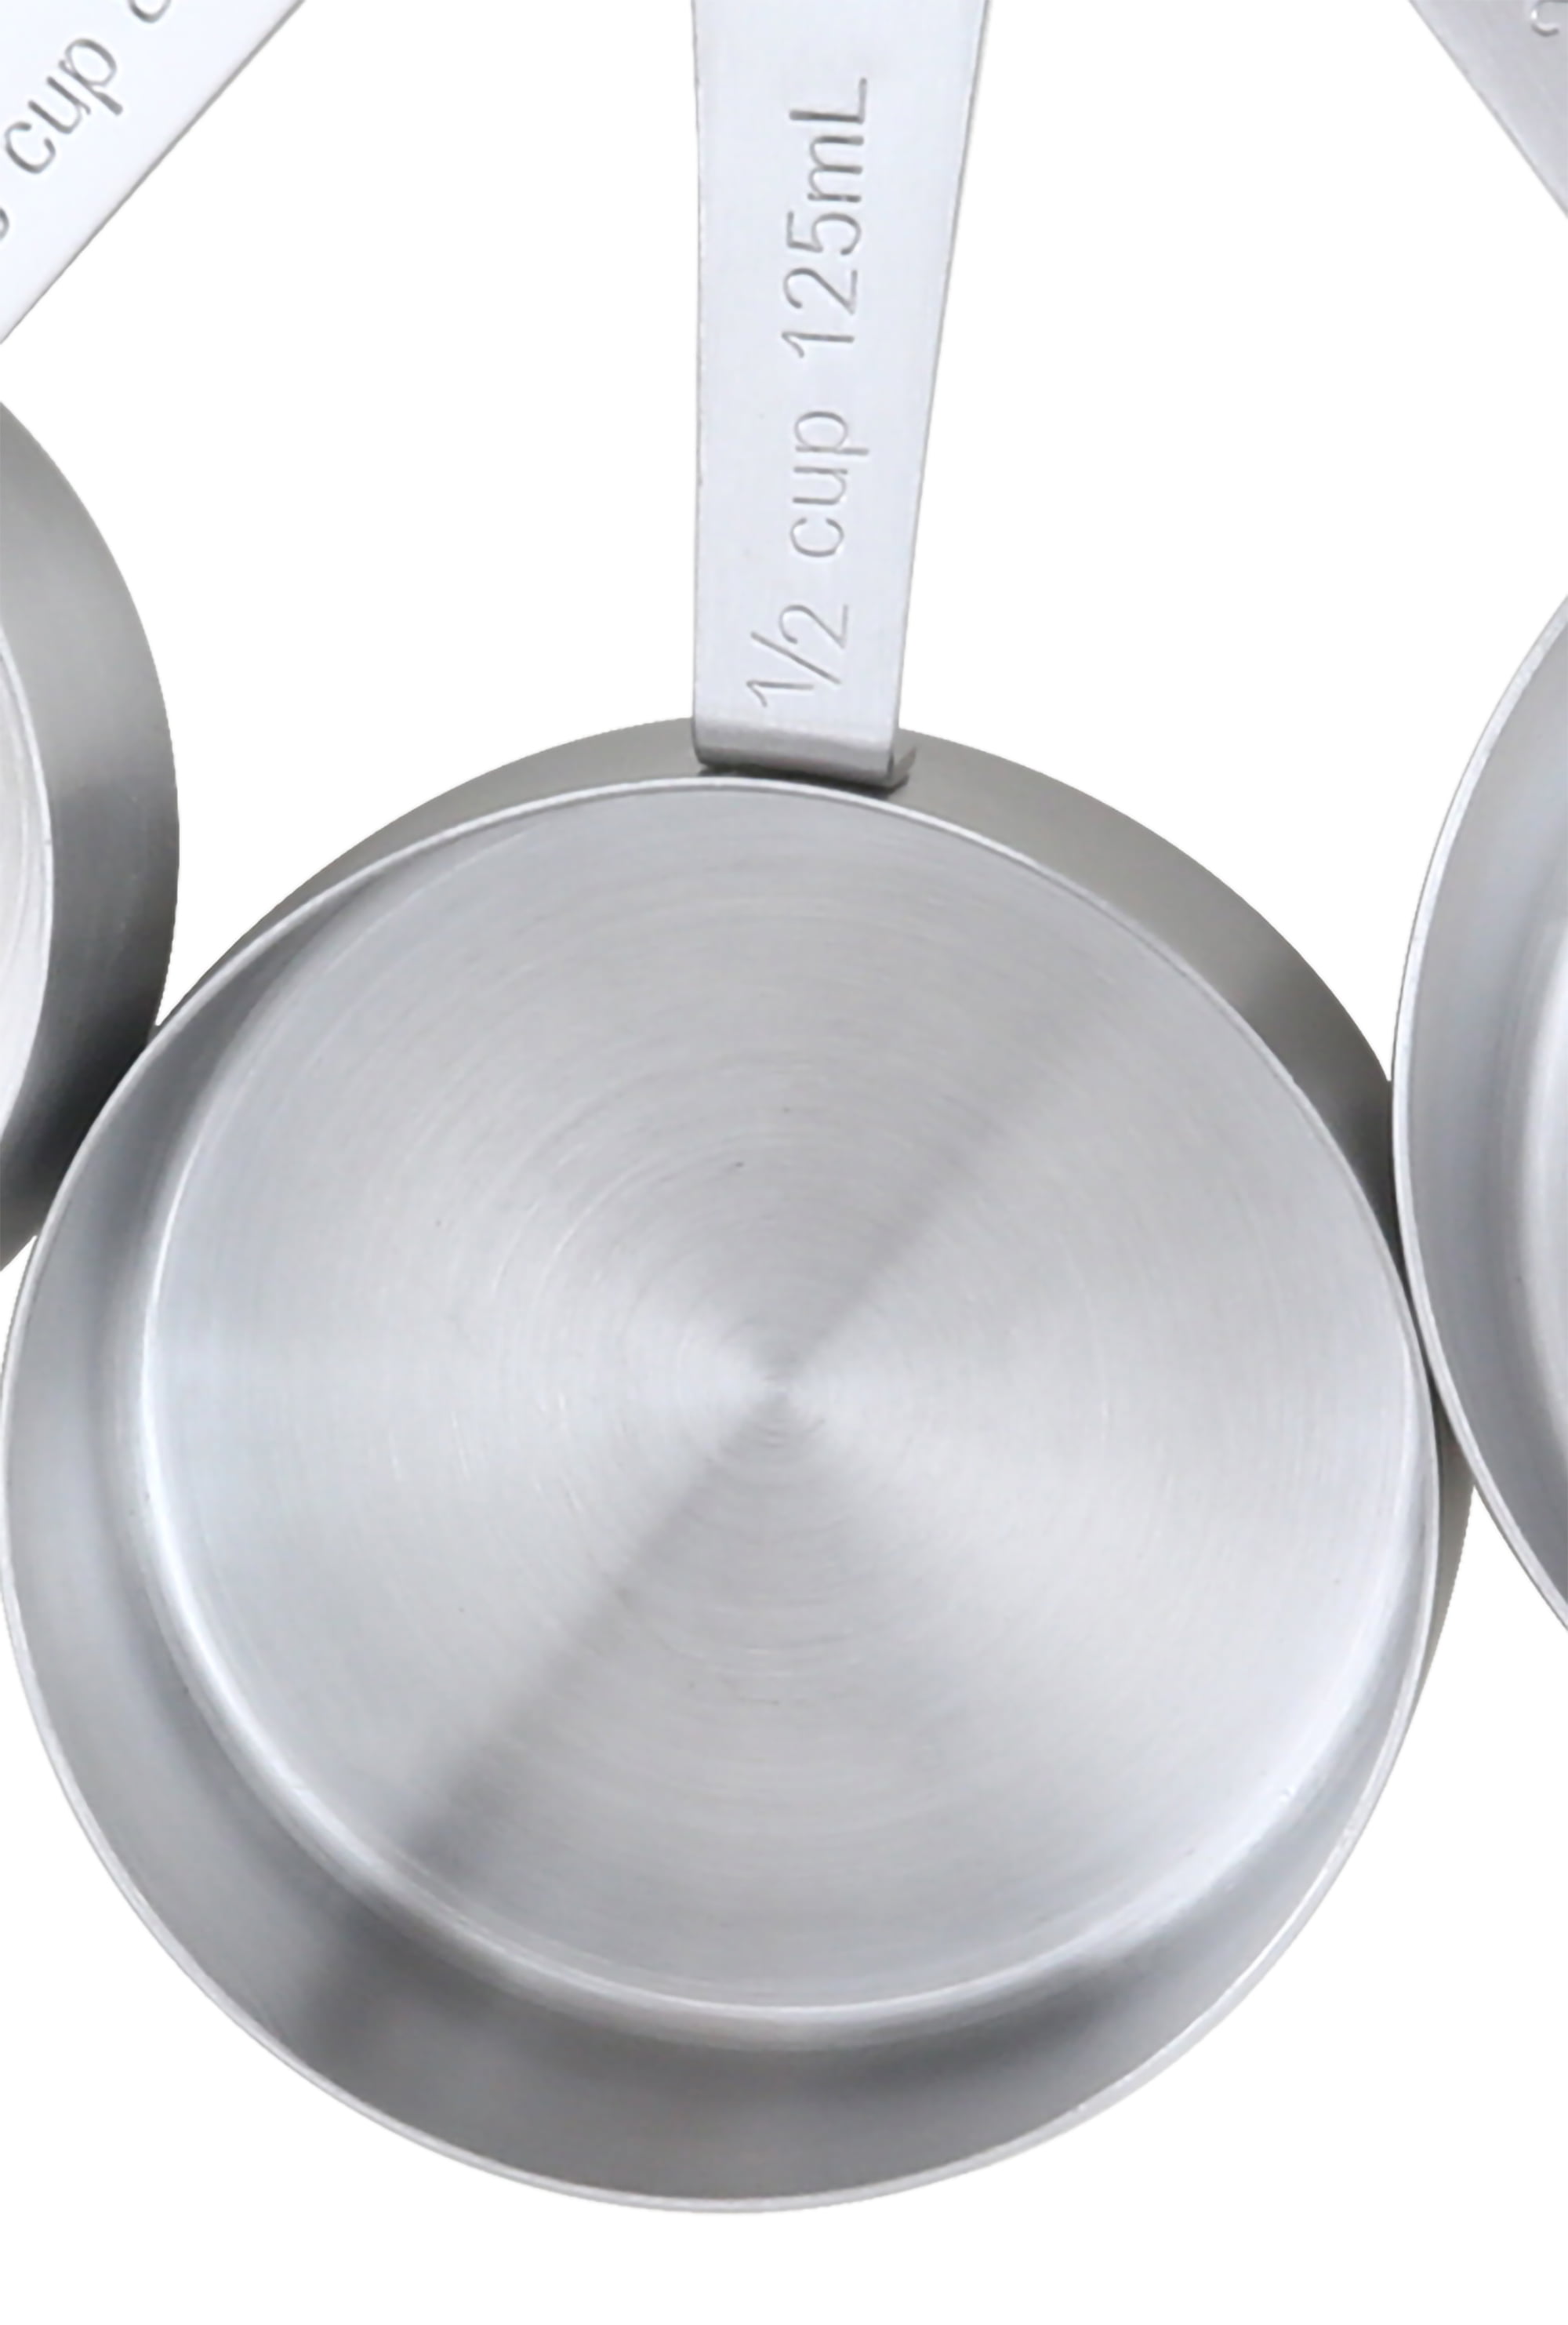 Mainstays 4 Piece Stainless Steel Measuring Spoons on Storage Ring Silver 